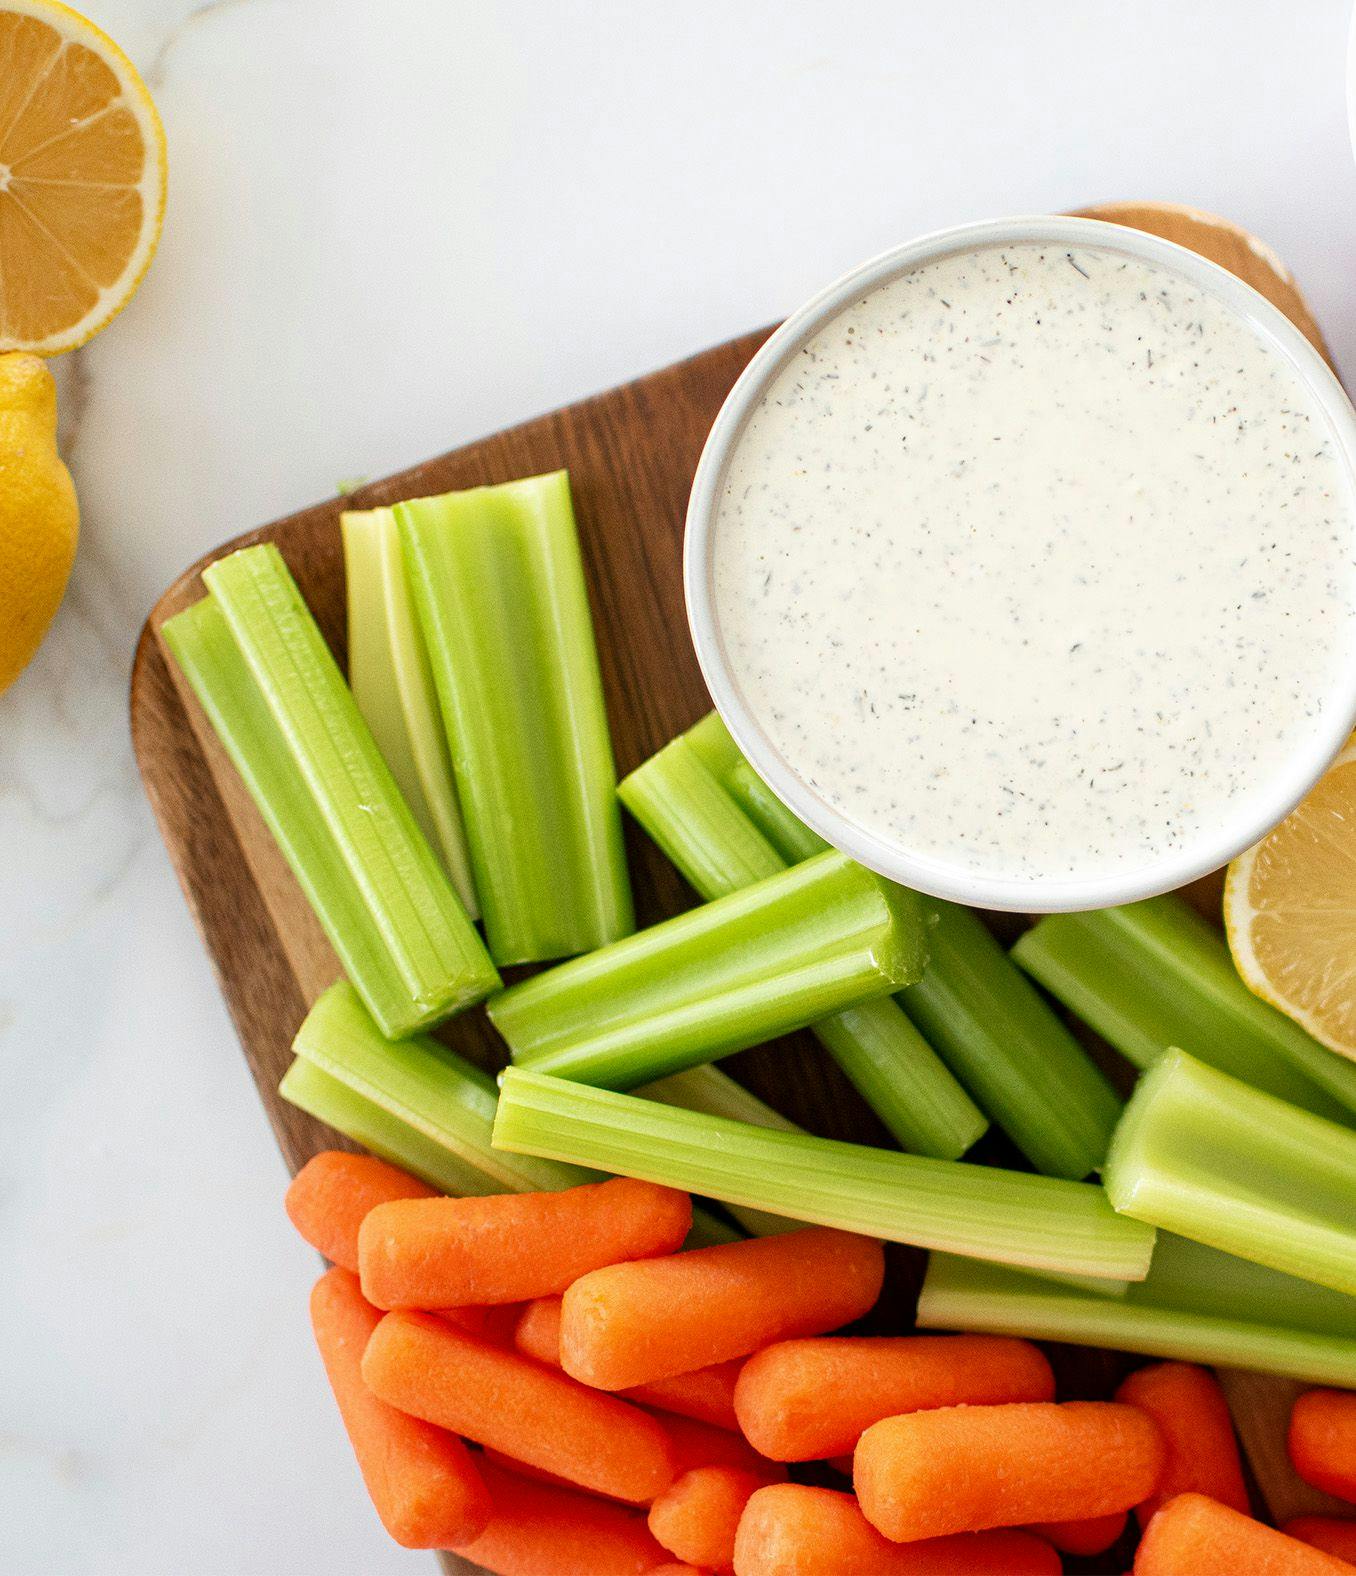 Garlic Lemon Dill Dip displayed on a cutting board with lemon, carrots and celery.